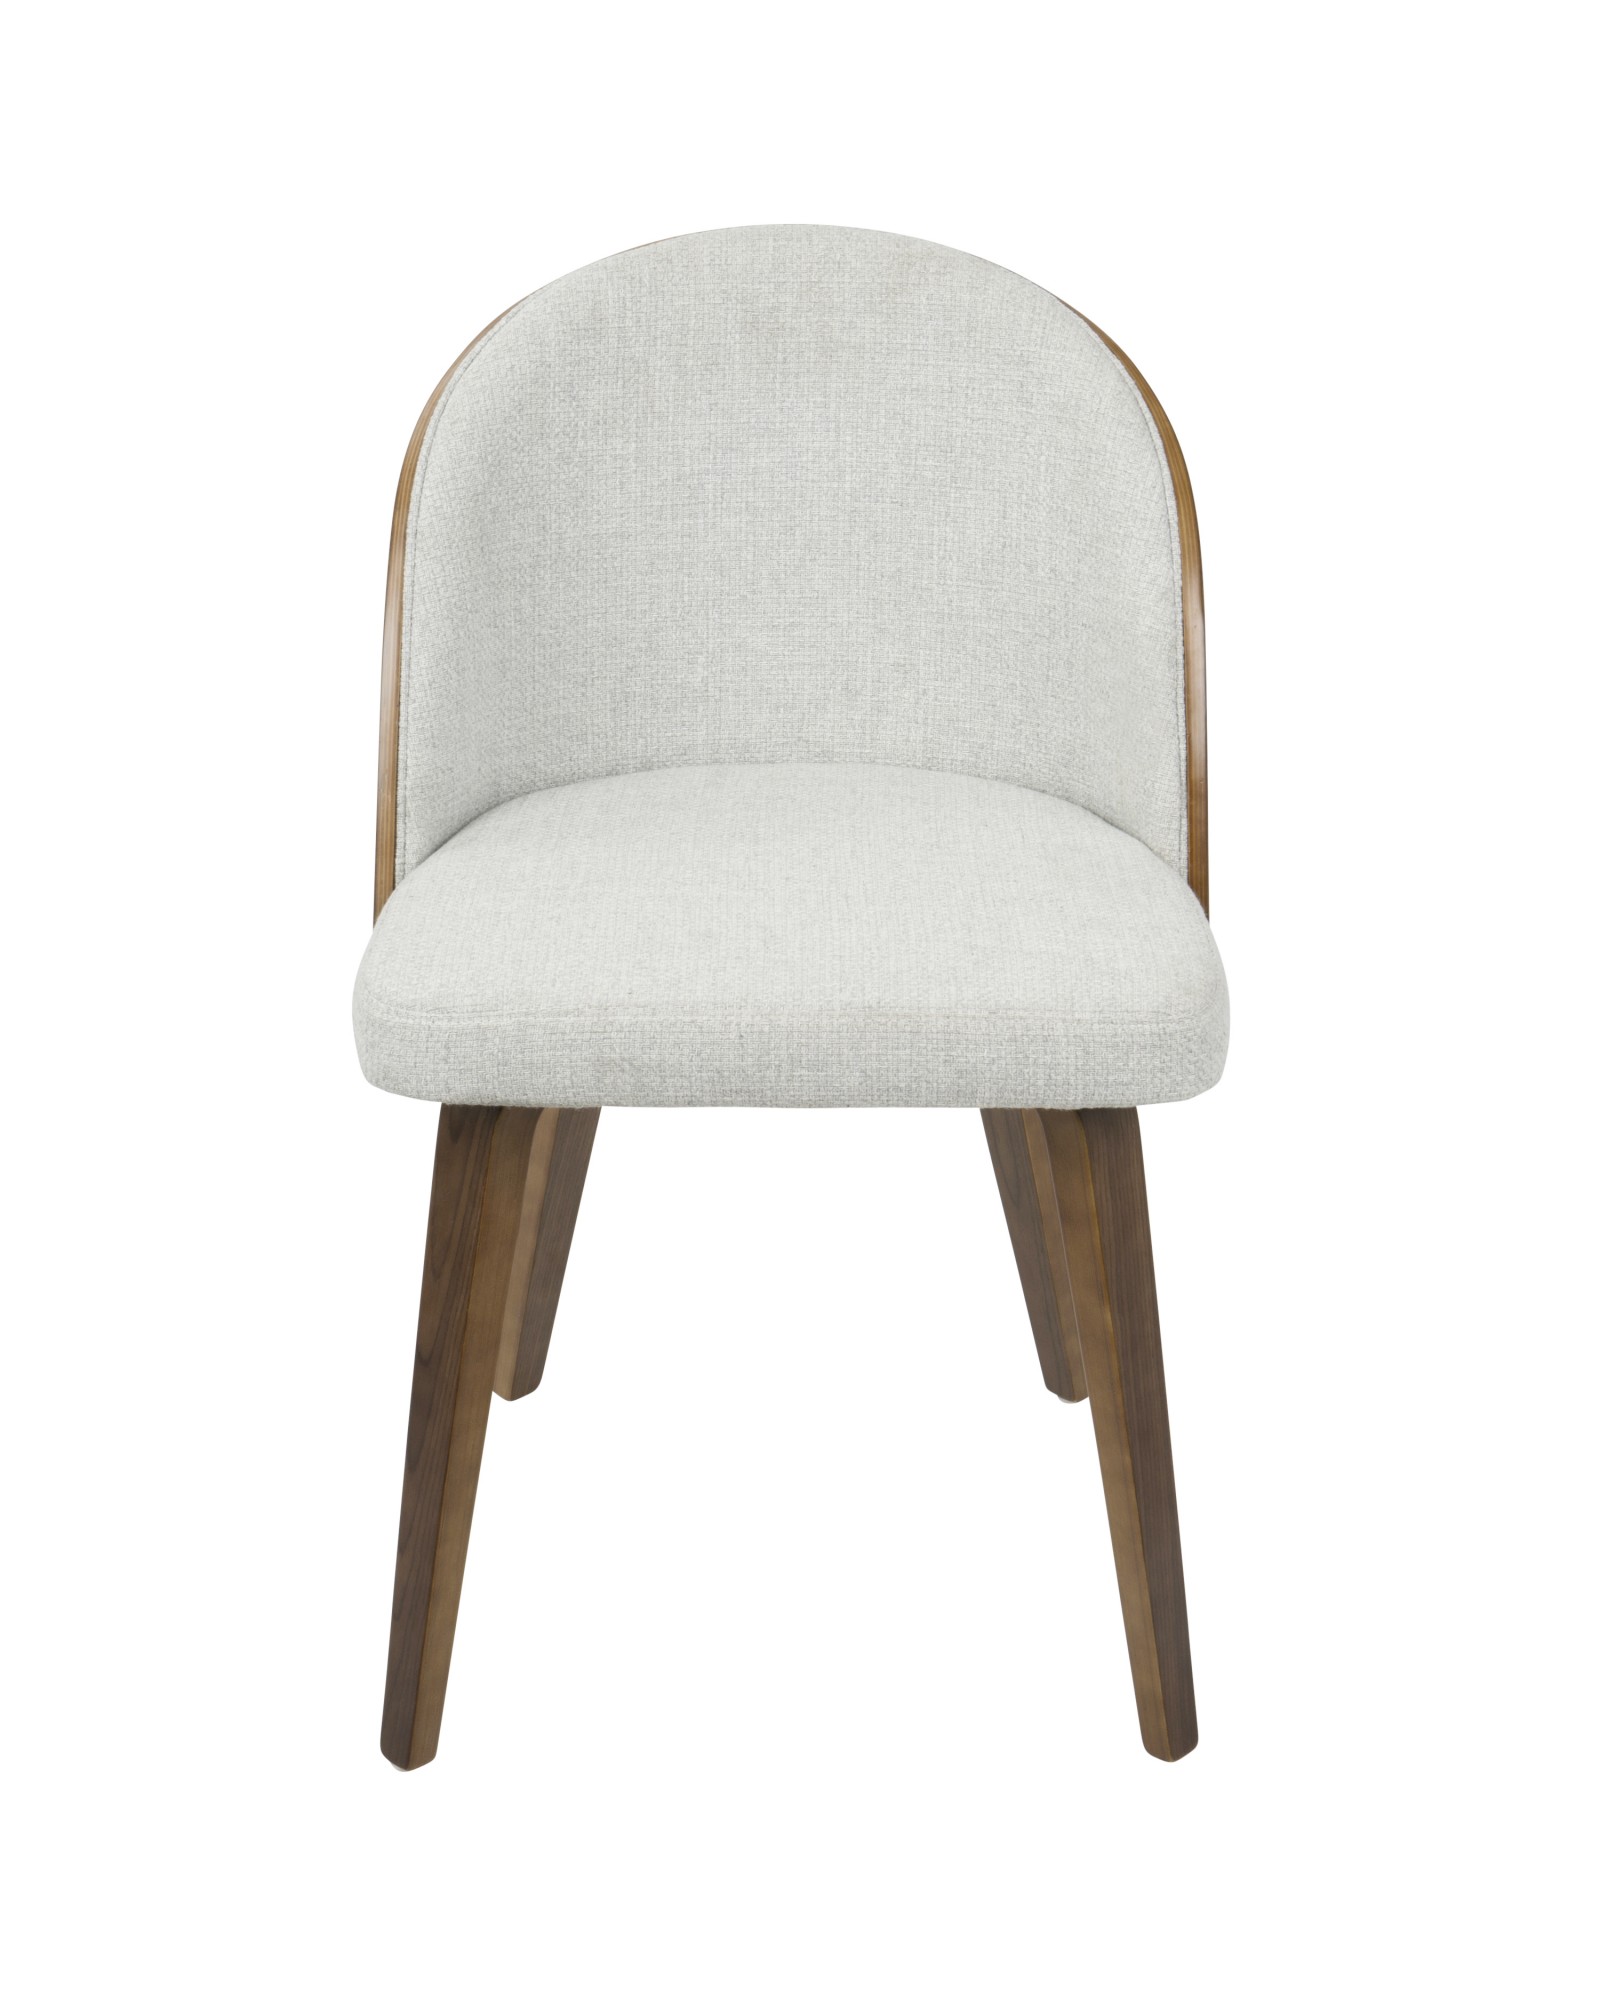 Luna Contemporary Dining/Accent Chair in Walnut with White Noise Fabric - Set of 2